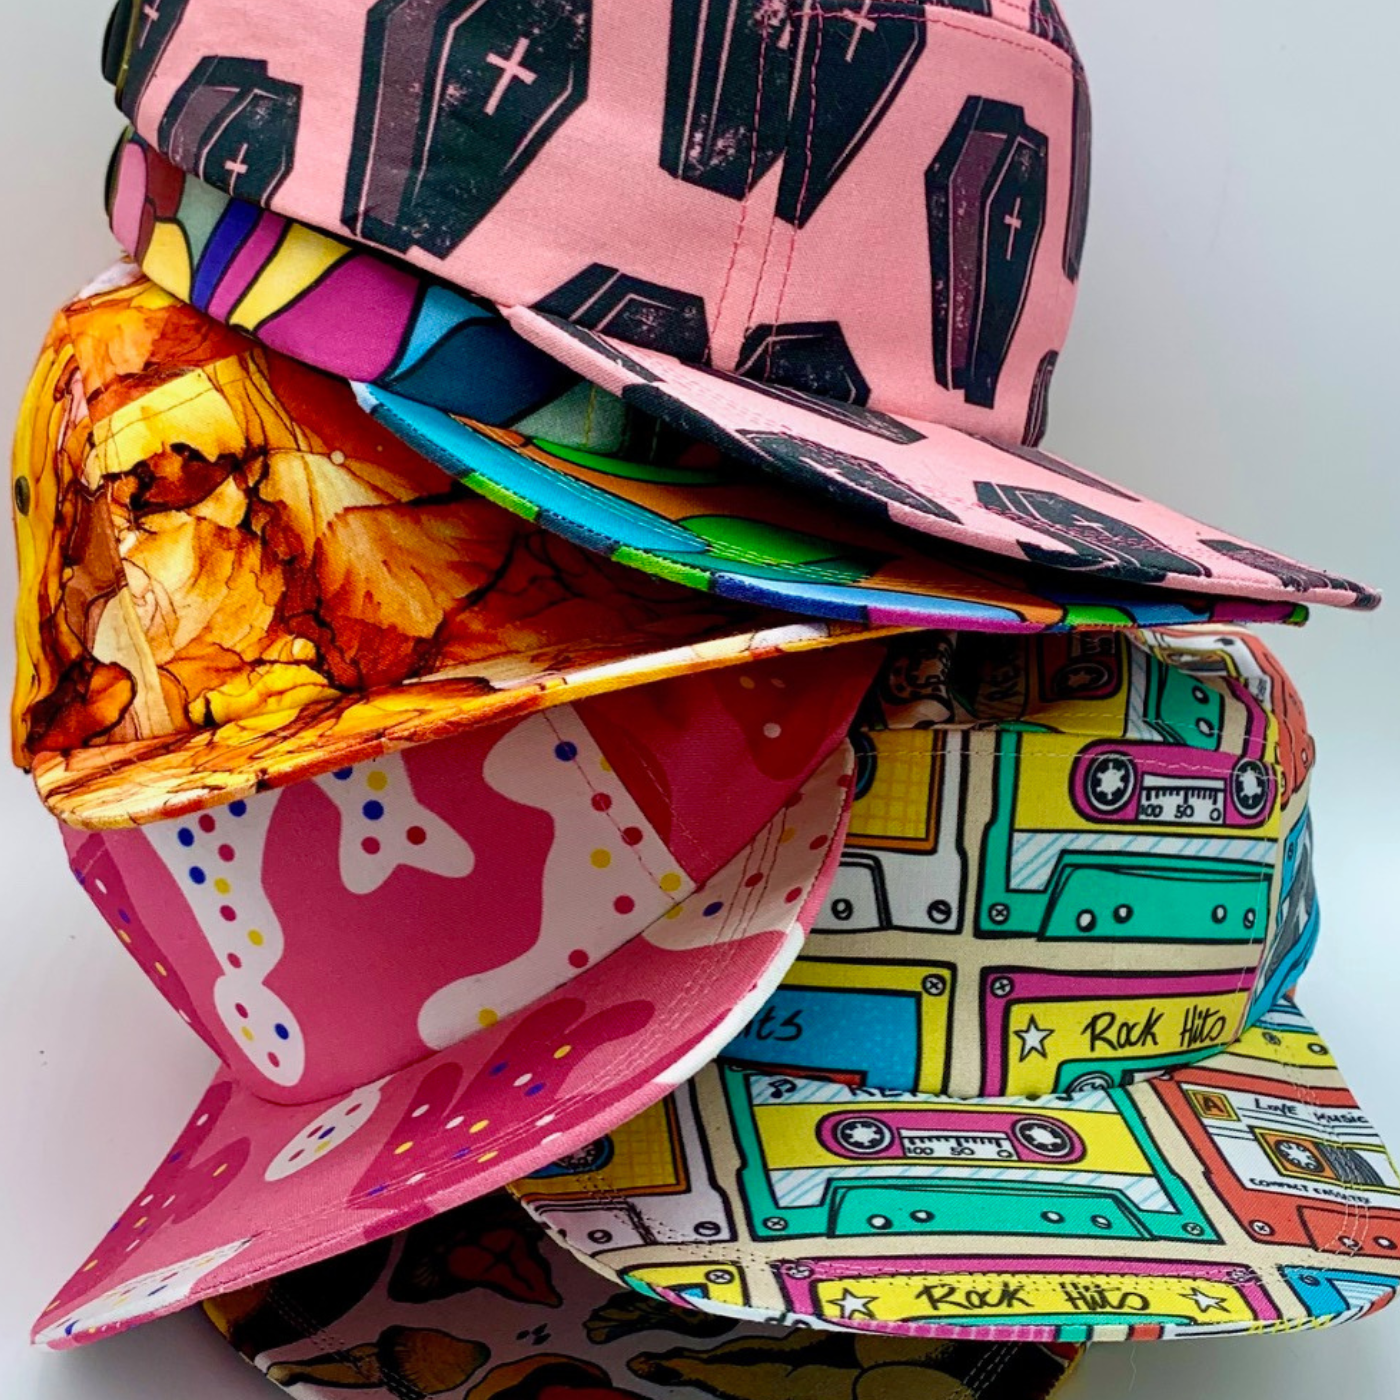 A stack of six baseball caps. From top to bottom, their featured designs are black coffins on a pink background; multicolored geometric jewel tone blocks; orange, black and yellow swirls; white blobs with red, yellow and blue small dots on a hot pink background; cassette tapes, some green, some orange, some yellow on a cream background; and in the shadow of the previous hat, what appears to be mushroom designs and a white background.